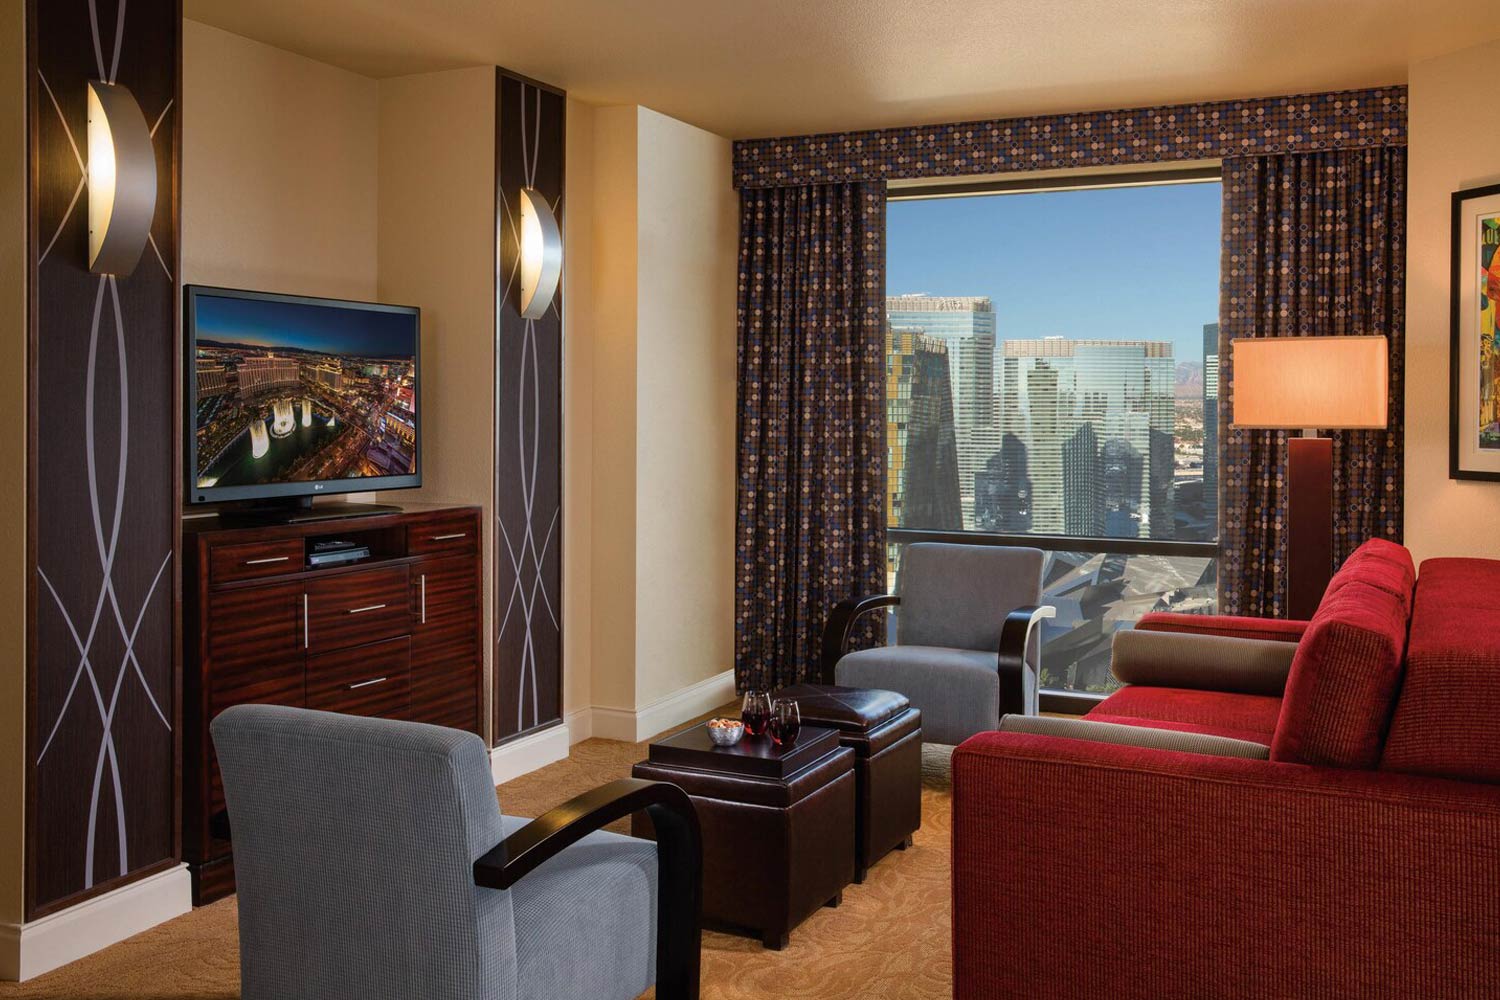 HOTEL SUITES AT MARRIOTT'S GRAND CHATEAU LAS VEGAS-NO RESORT FEE